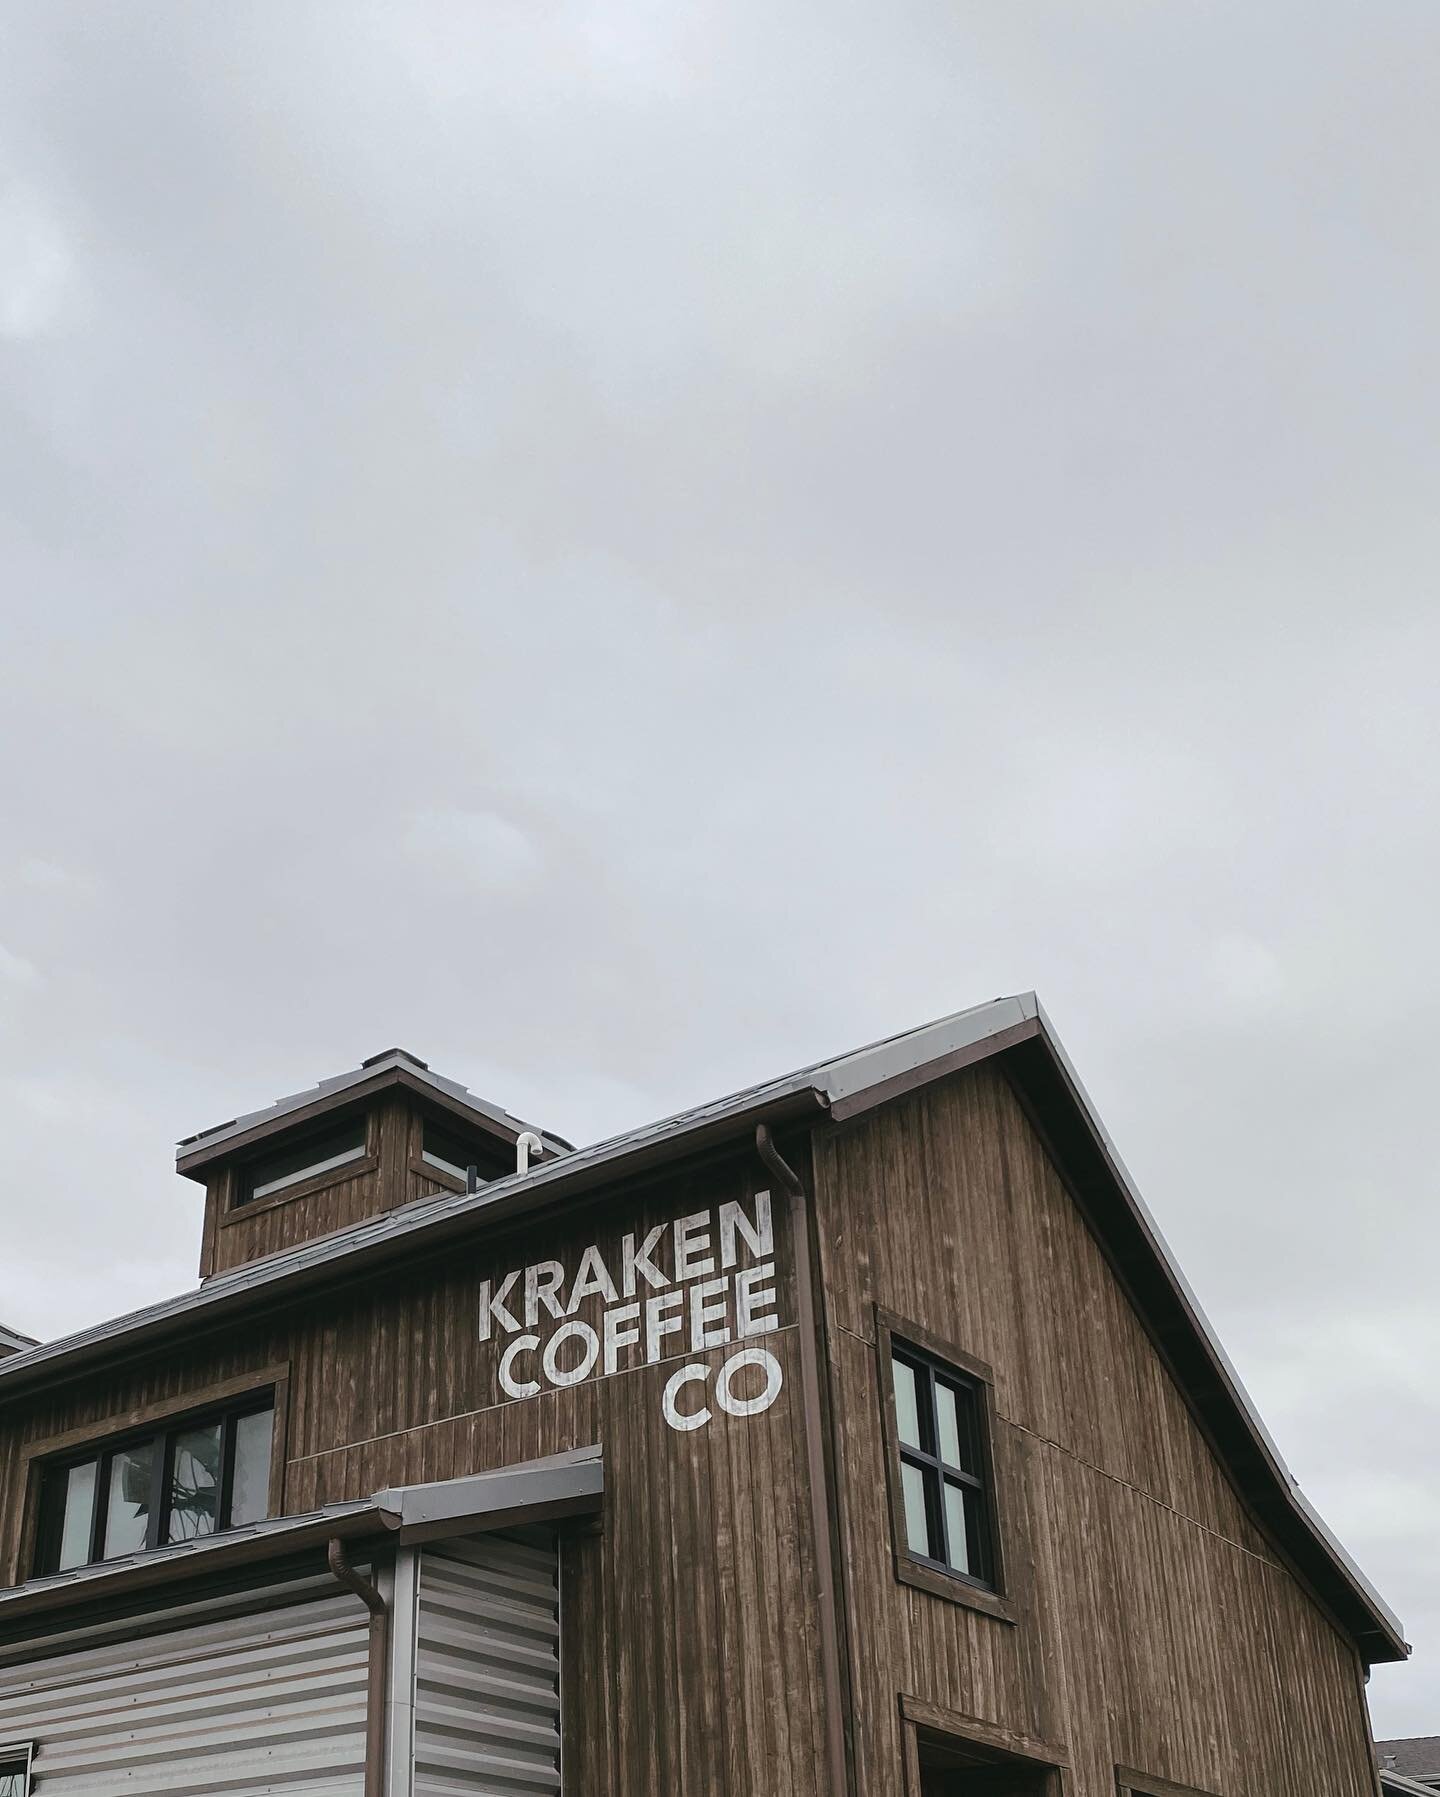 signage completed a few months ago for @krakencoffeeco.